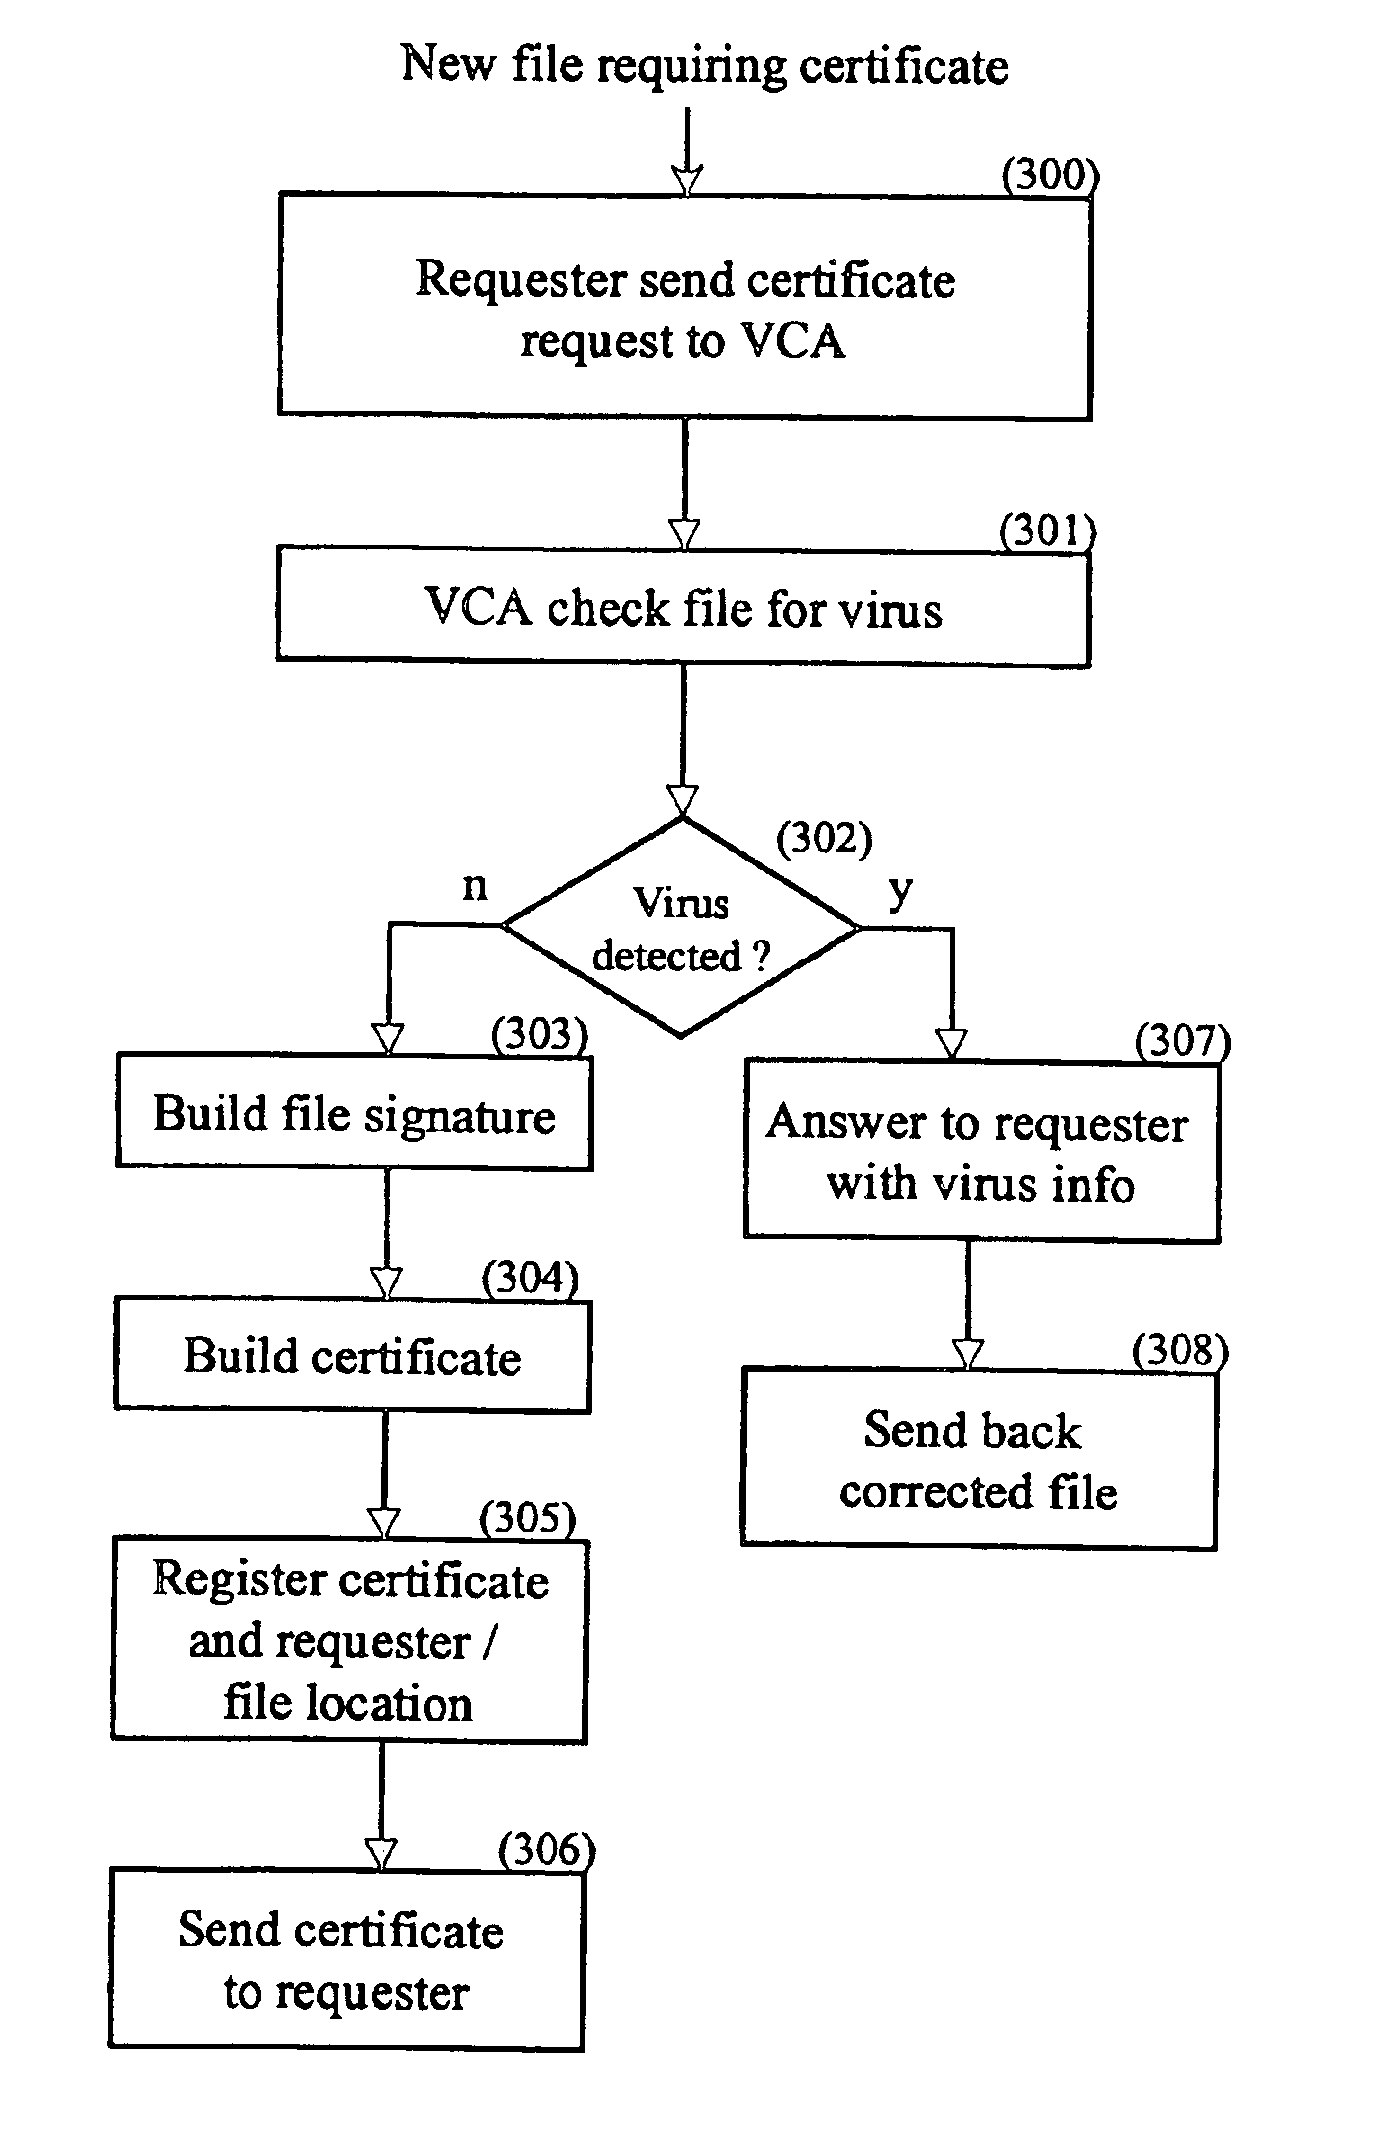 Method and system for generating and using a virus free file certificate